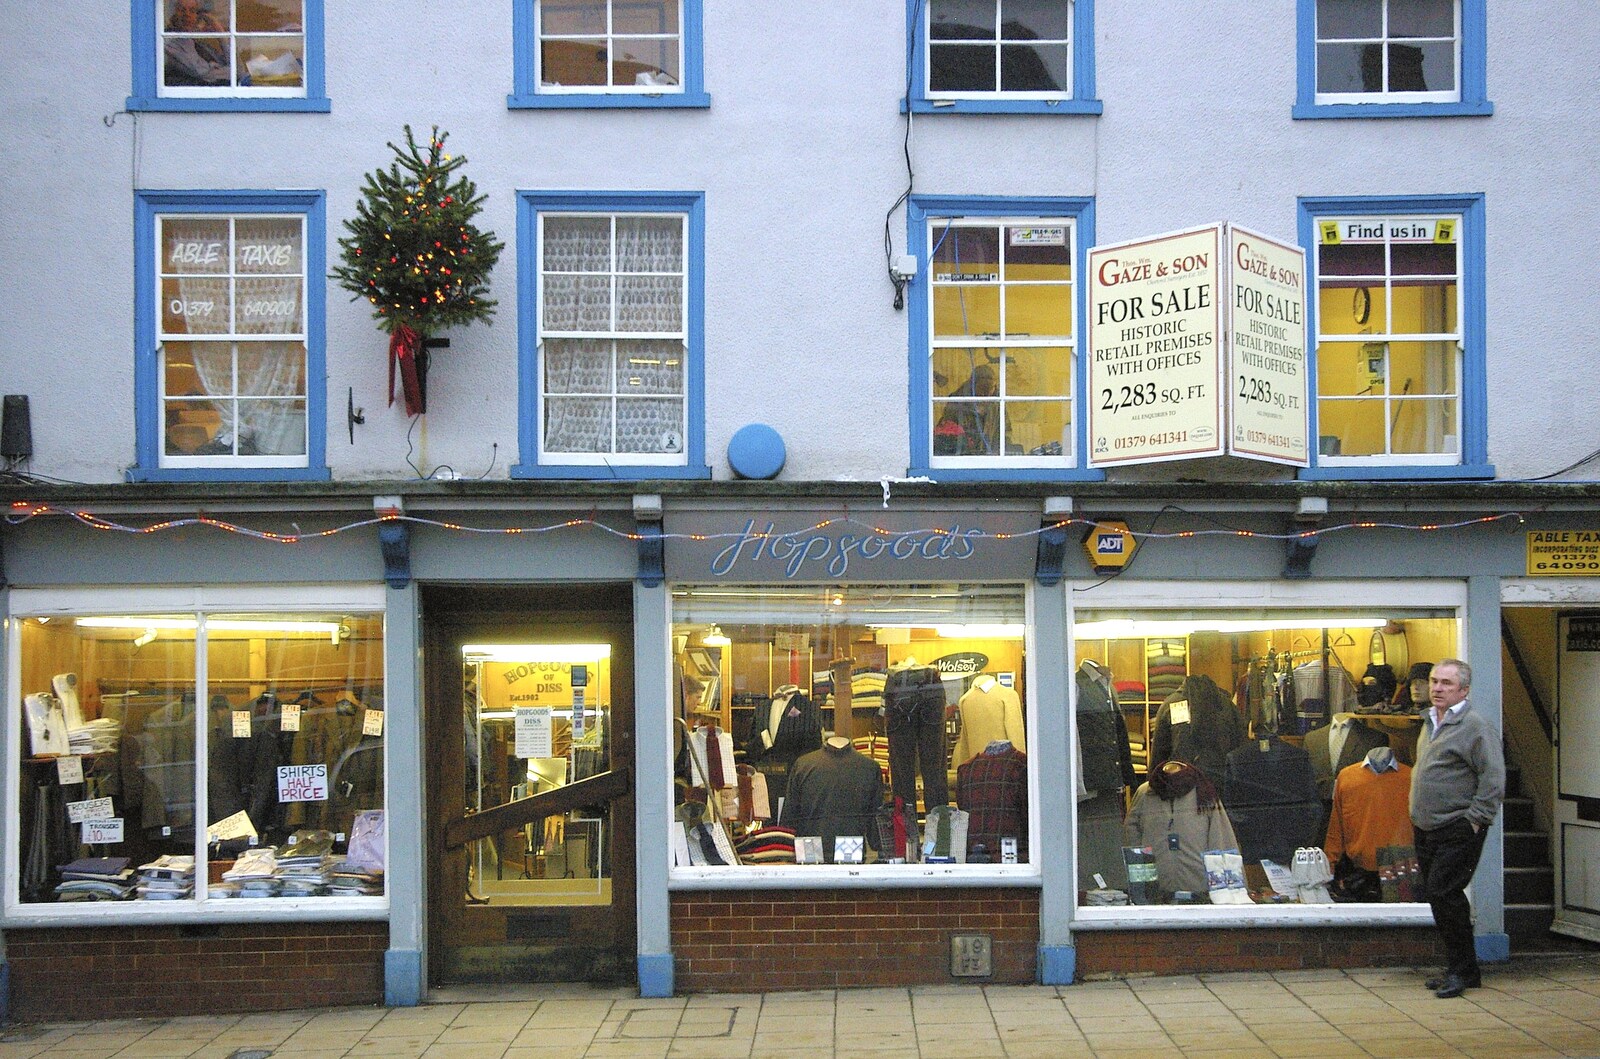 Hopgoods - front aspect from A Portrait of Hopgoods: Gentlemen's Outfitters, Diss, Norfolk - 4th January 2006